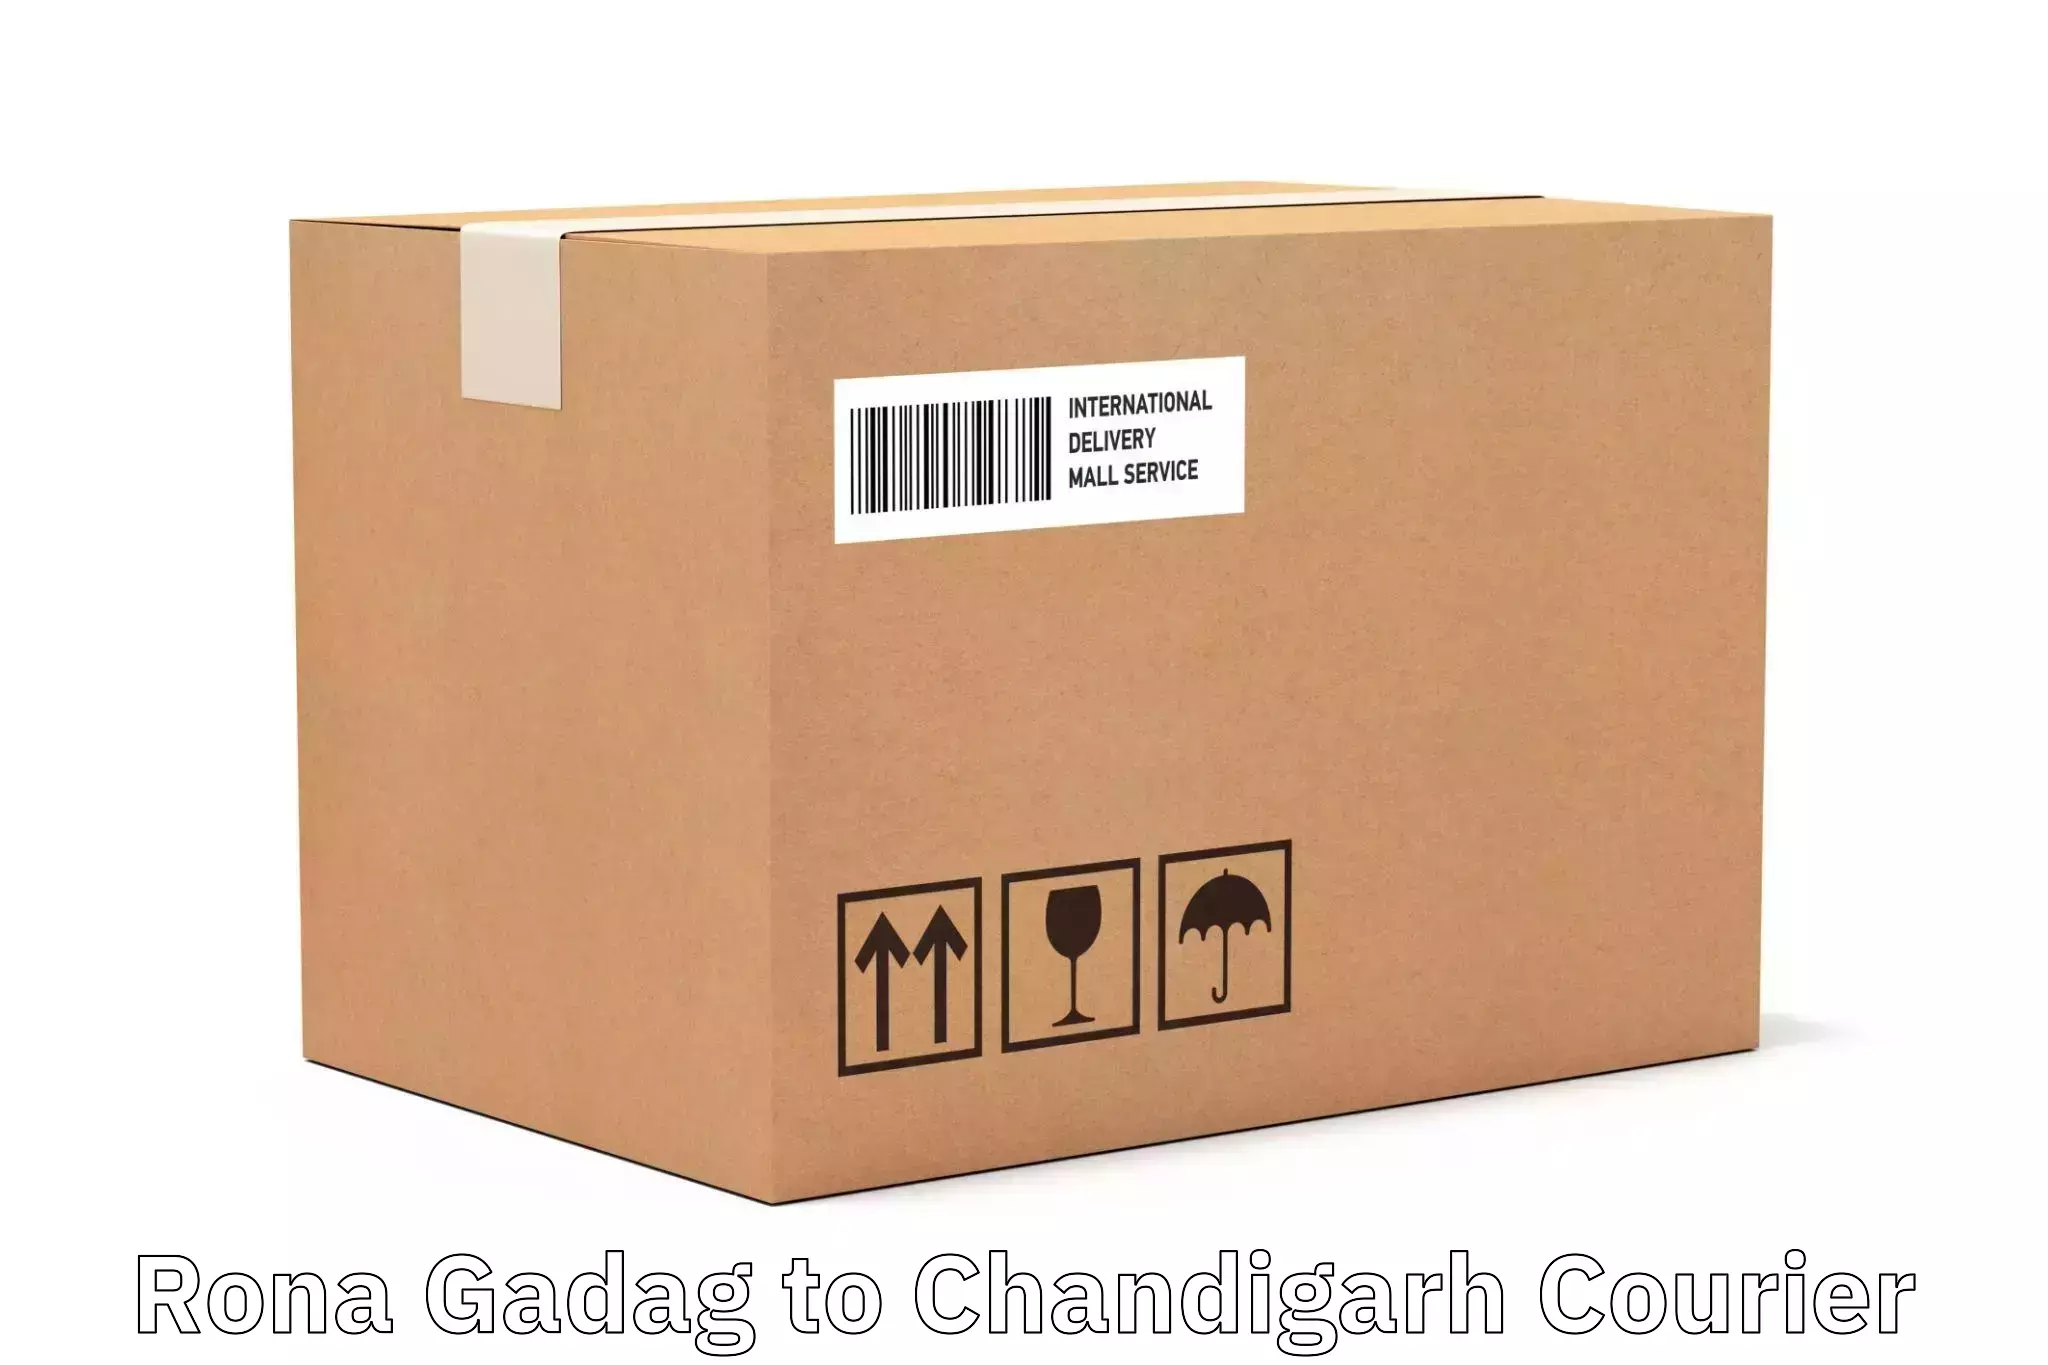 Global delivery options Rona Gadag to Chandigarh